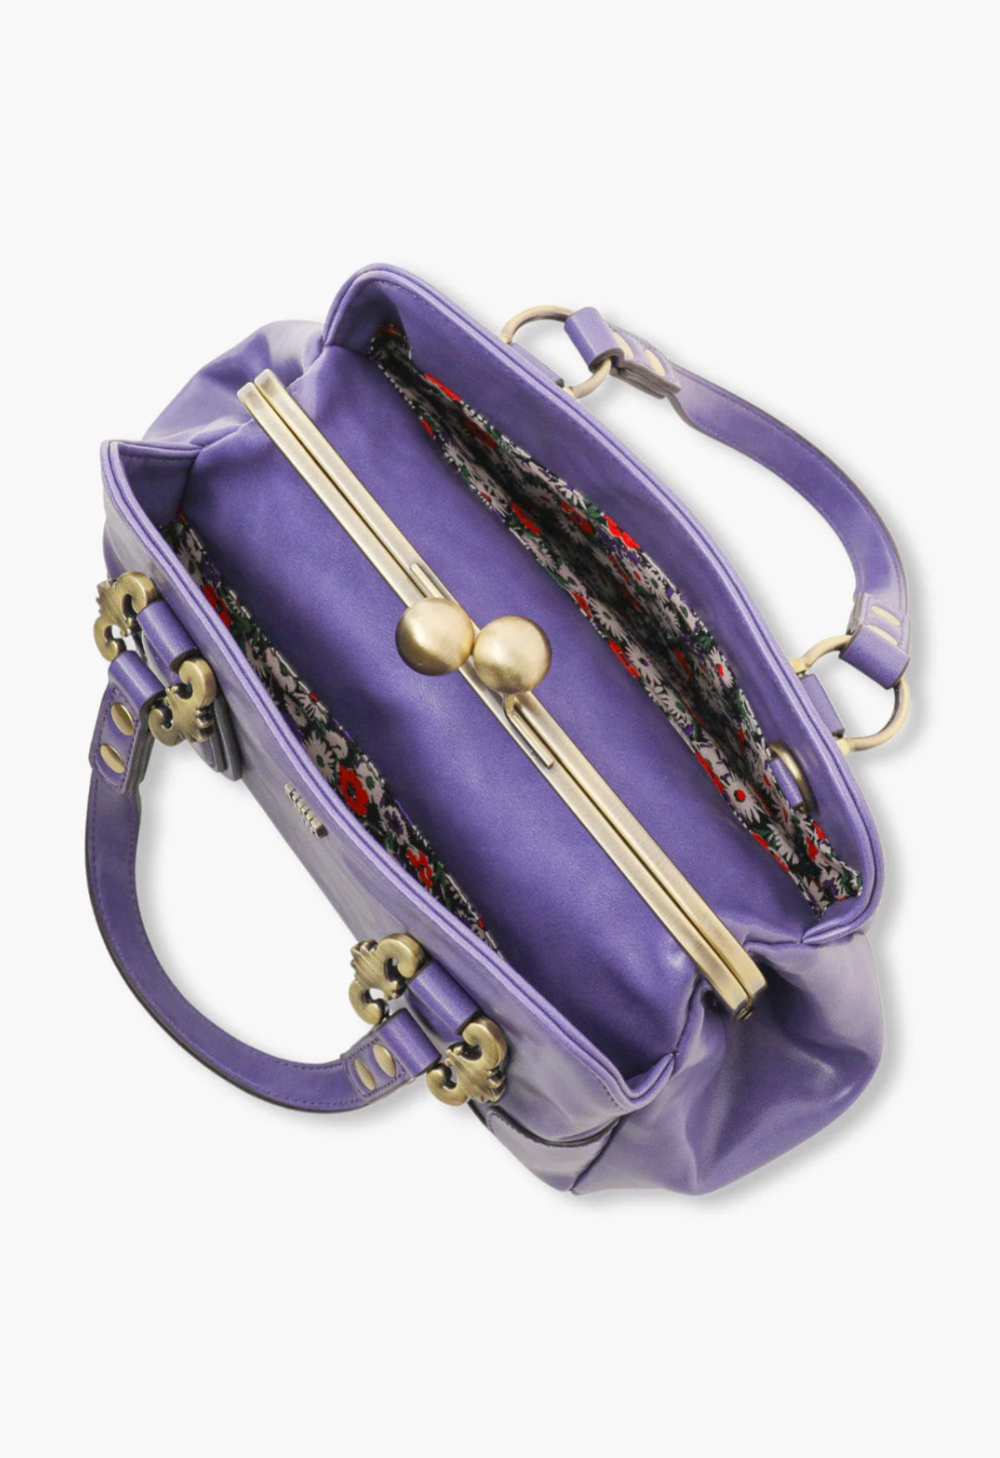 Handbag purple, the central compartment separates floral fabric compartments for belongings